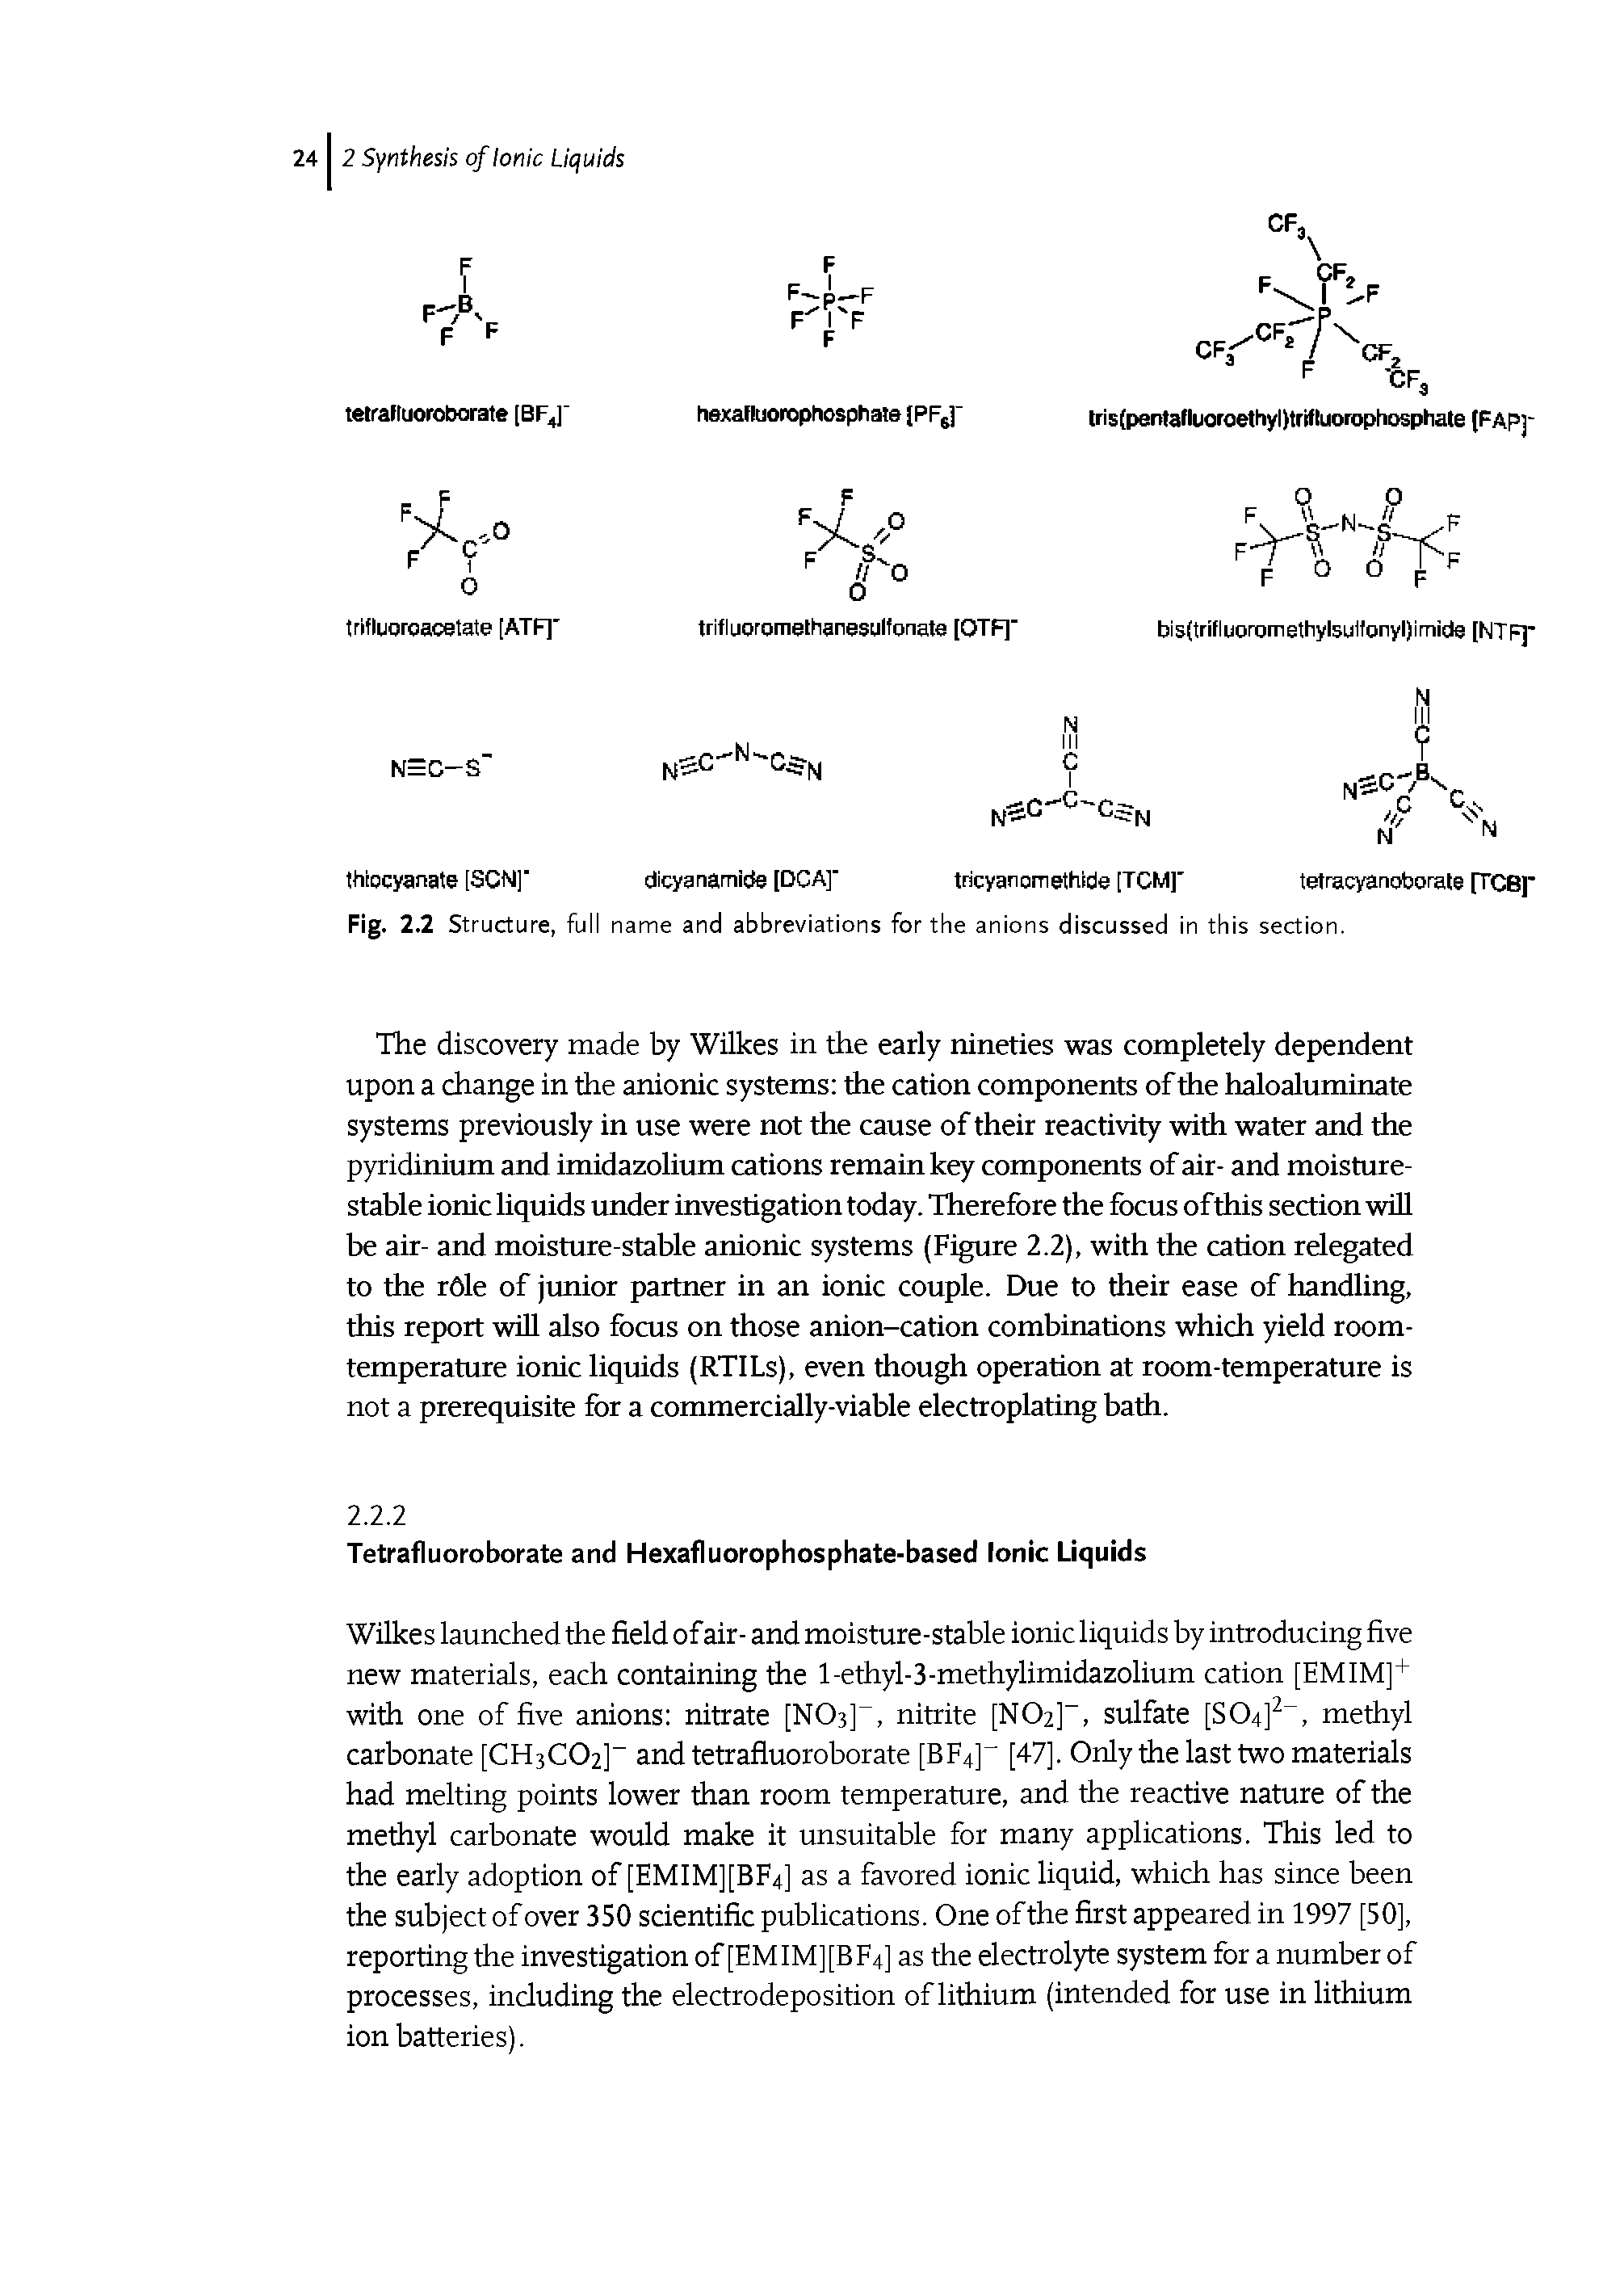 Fig. 2.2 Structure, full name and abbreviations for the anions discussed in this section.